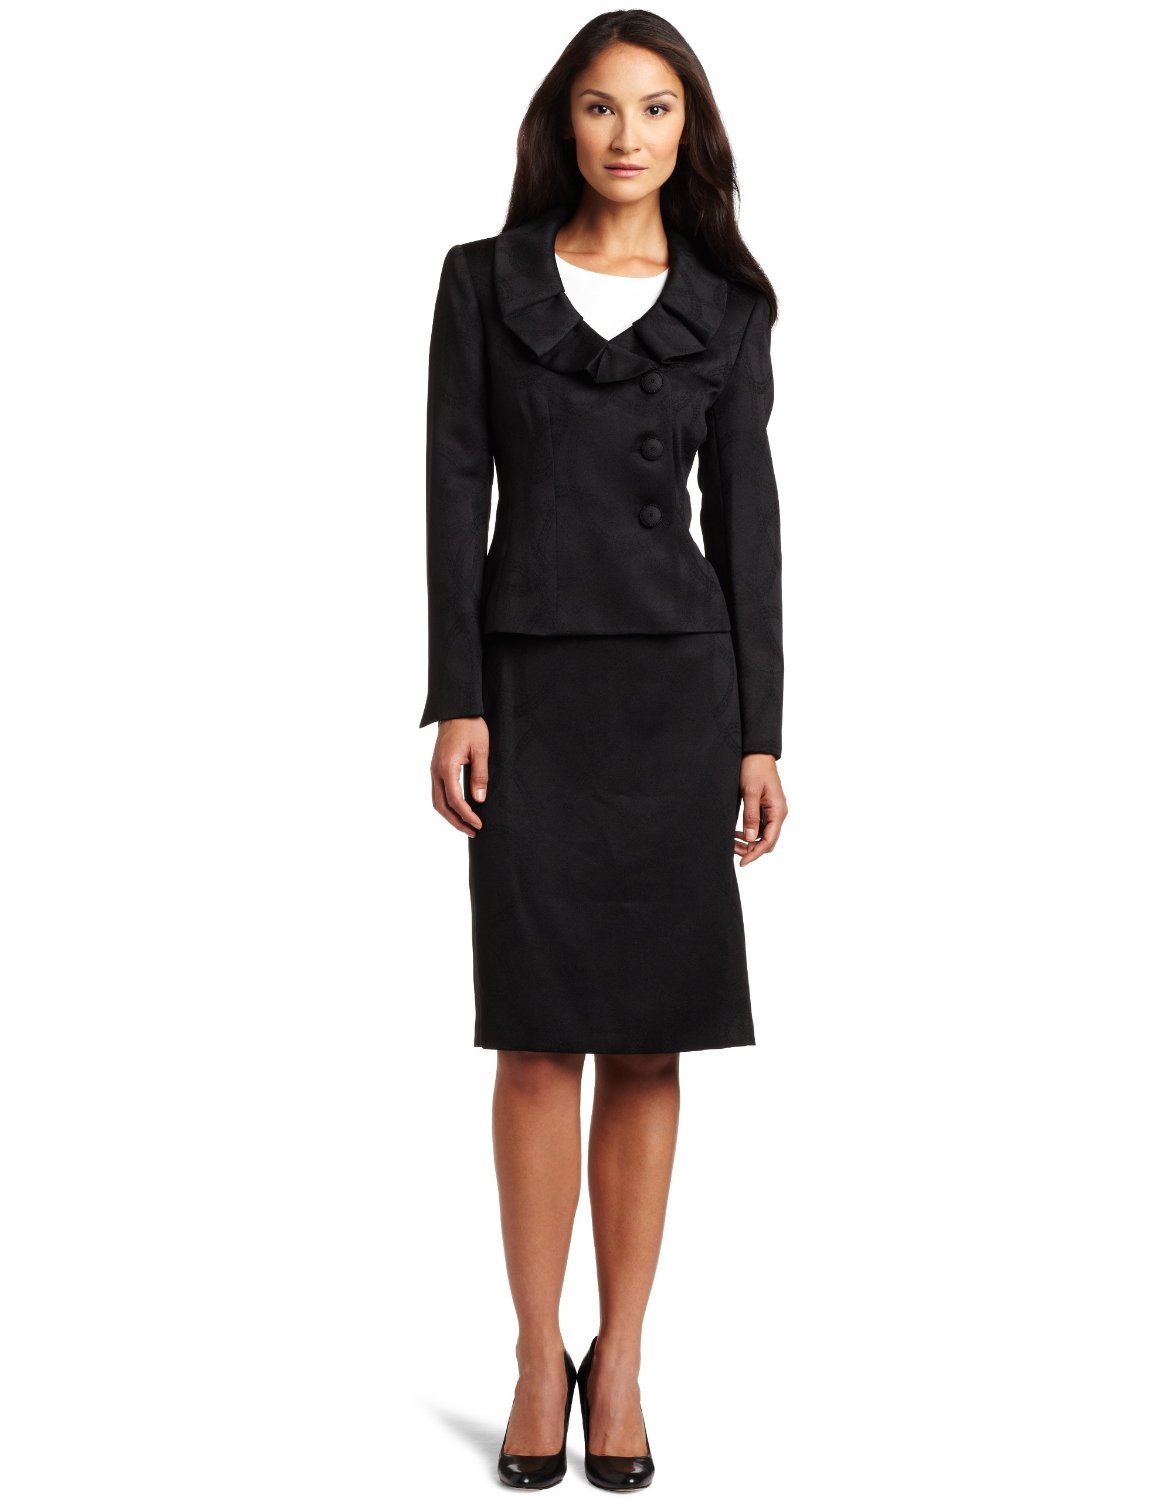 Business Casual Dress Code For Women Women S Business Casual Dresses